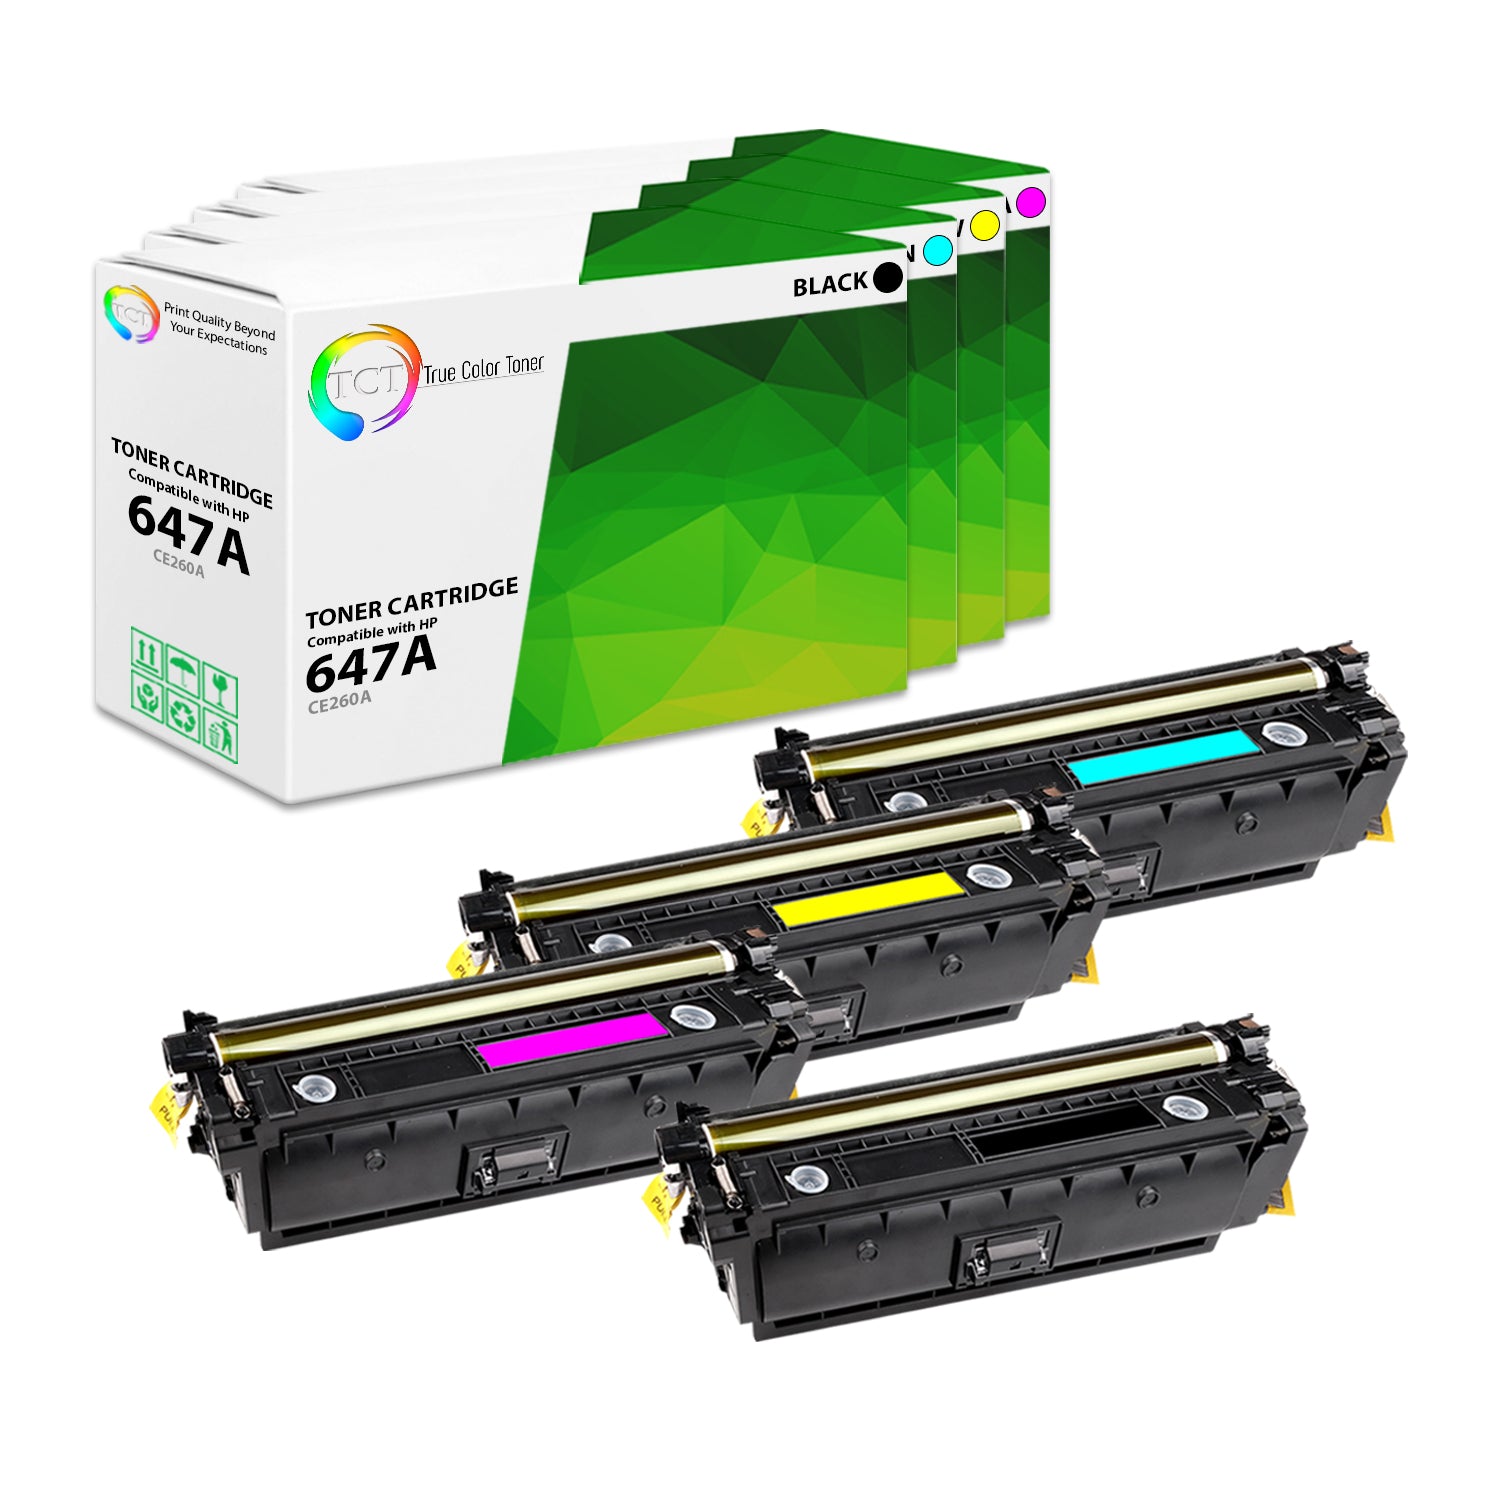 TCT Compatible Toner Cartridge Replacement for the HP 647A Series - 4 Pack (BK, C, M, Y)